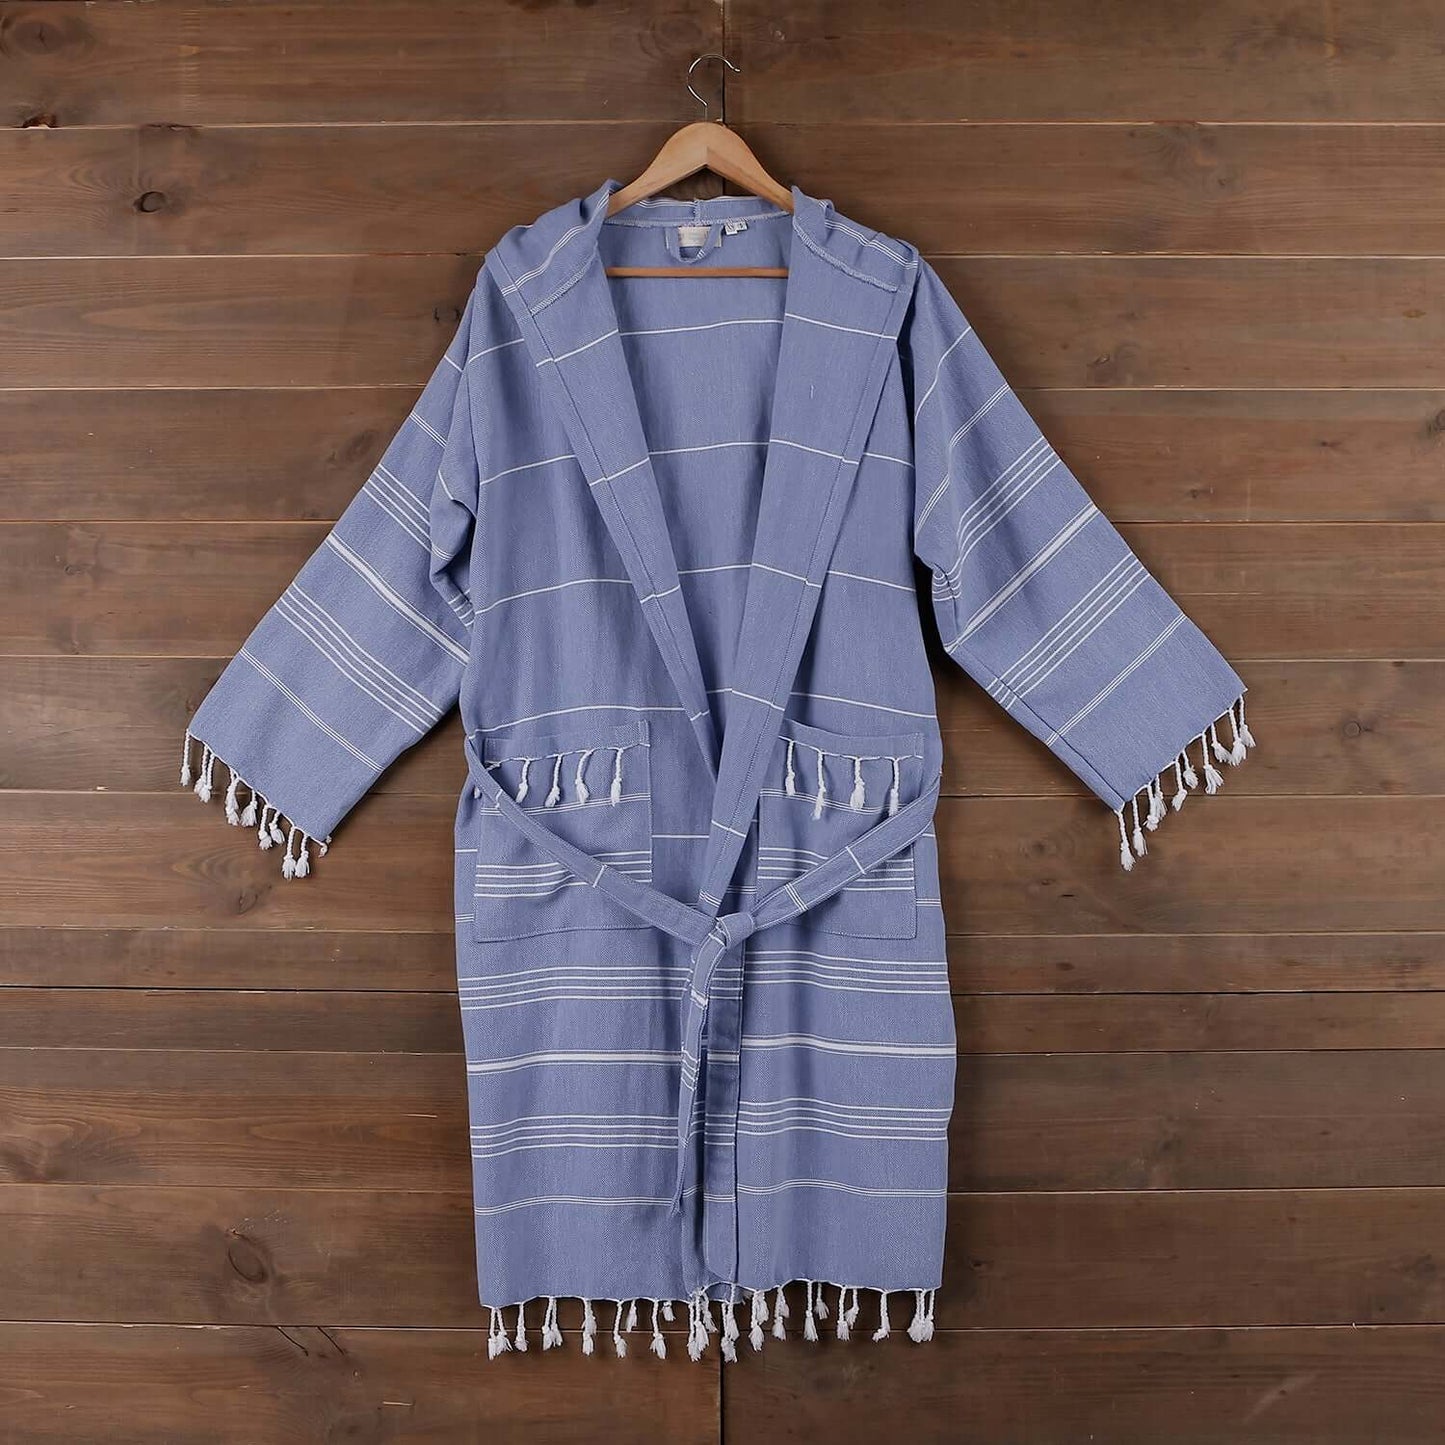 The Loom Legacy xsmall/small blue bathrobe hangs gracefully on a wooden hanger against a rustic wooden backdrop. The bathrobe boasts a calming blue shade with white stripe patterns, a tie belt for a secure fit, and fringe detailing along the pockets and h